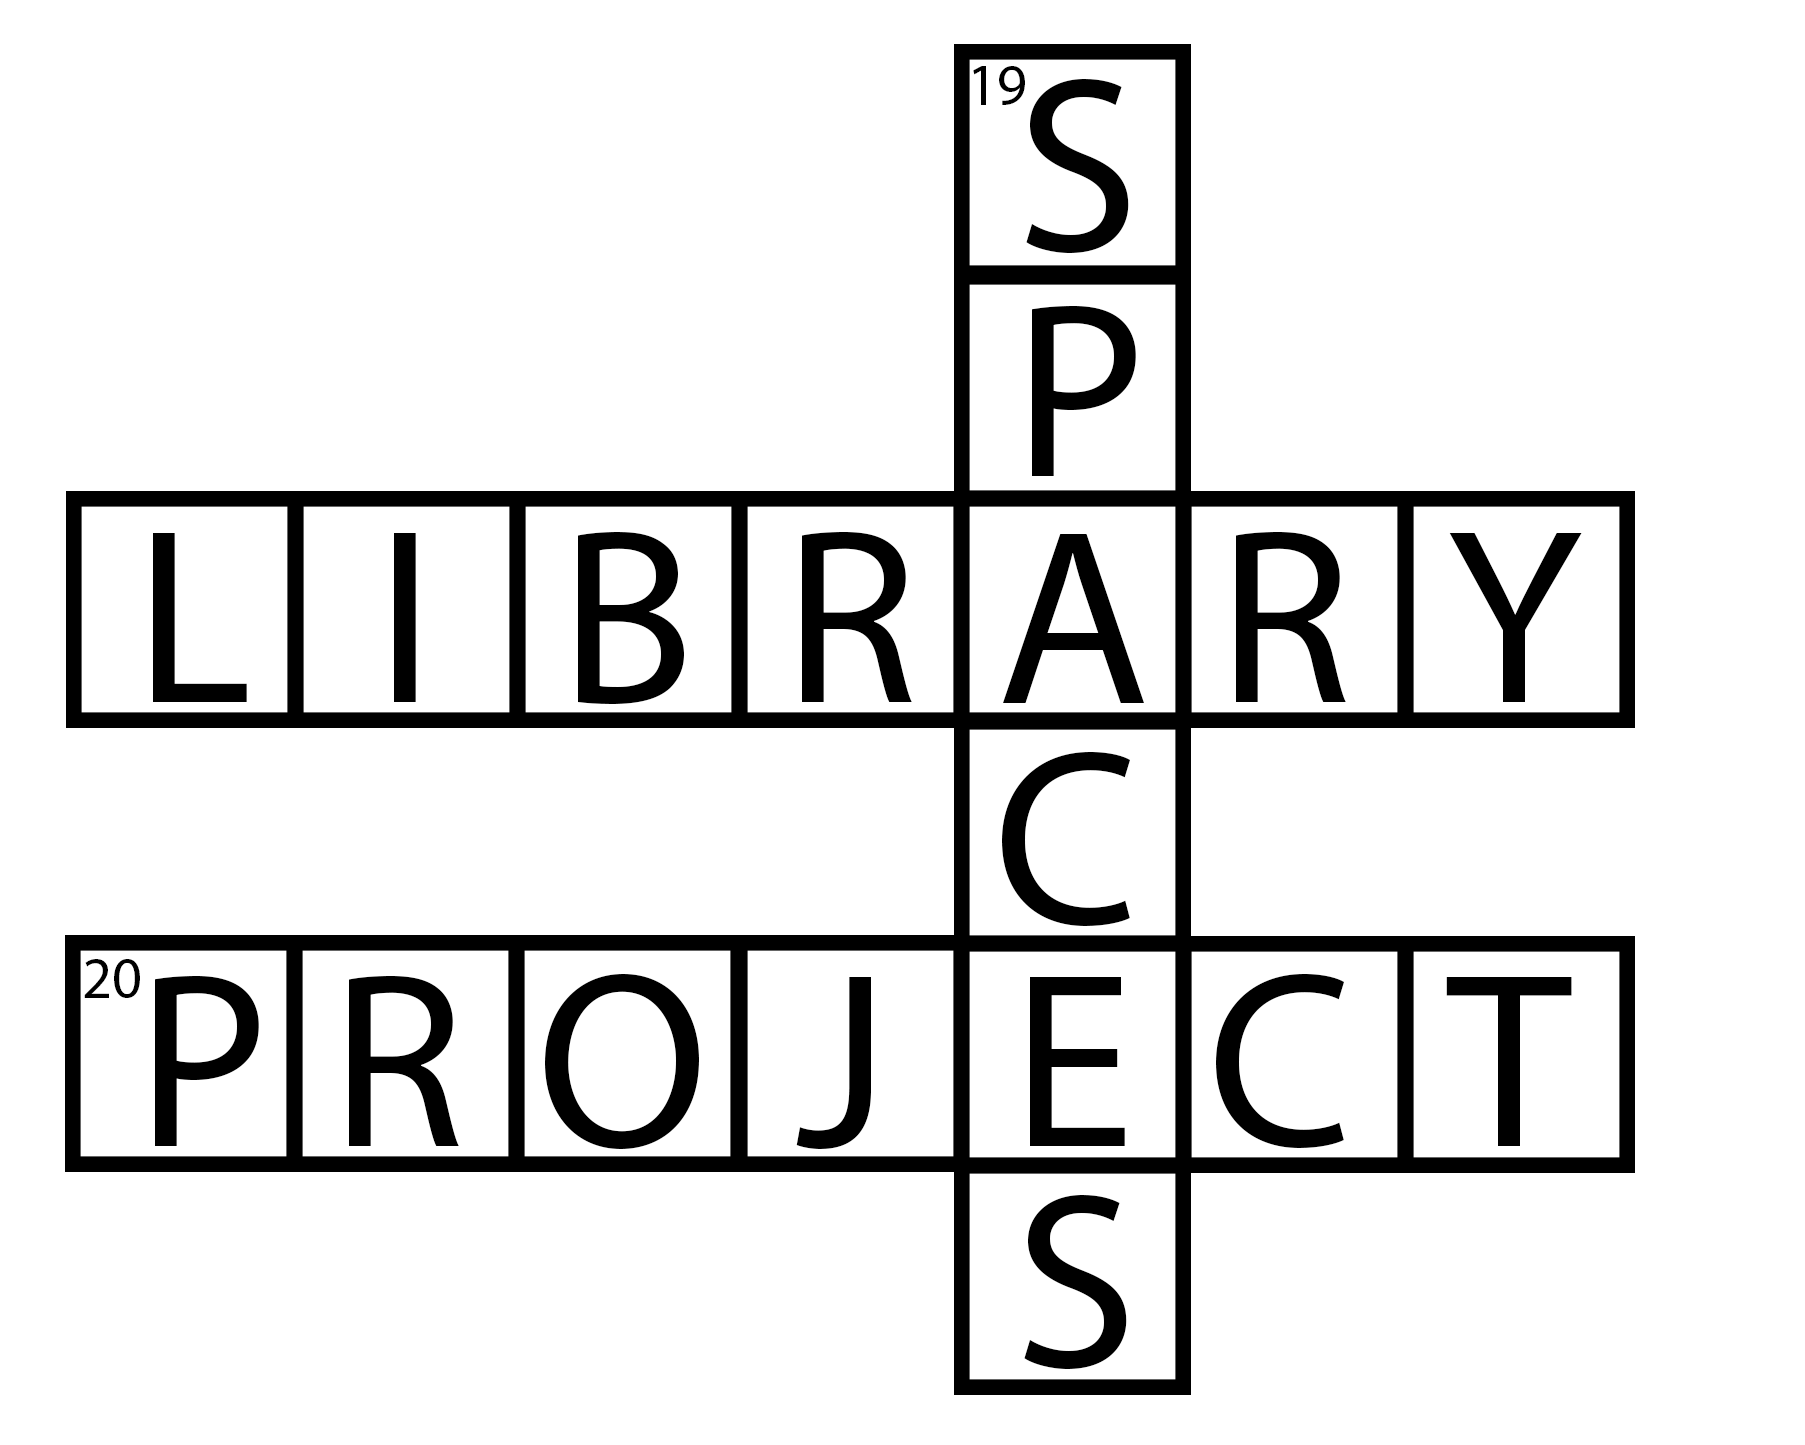 Library Spaces graphic image